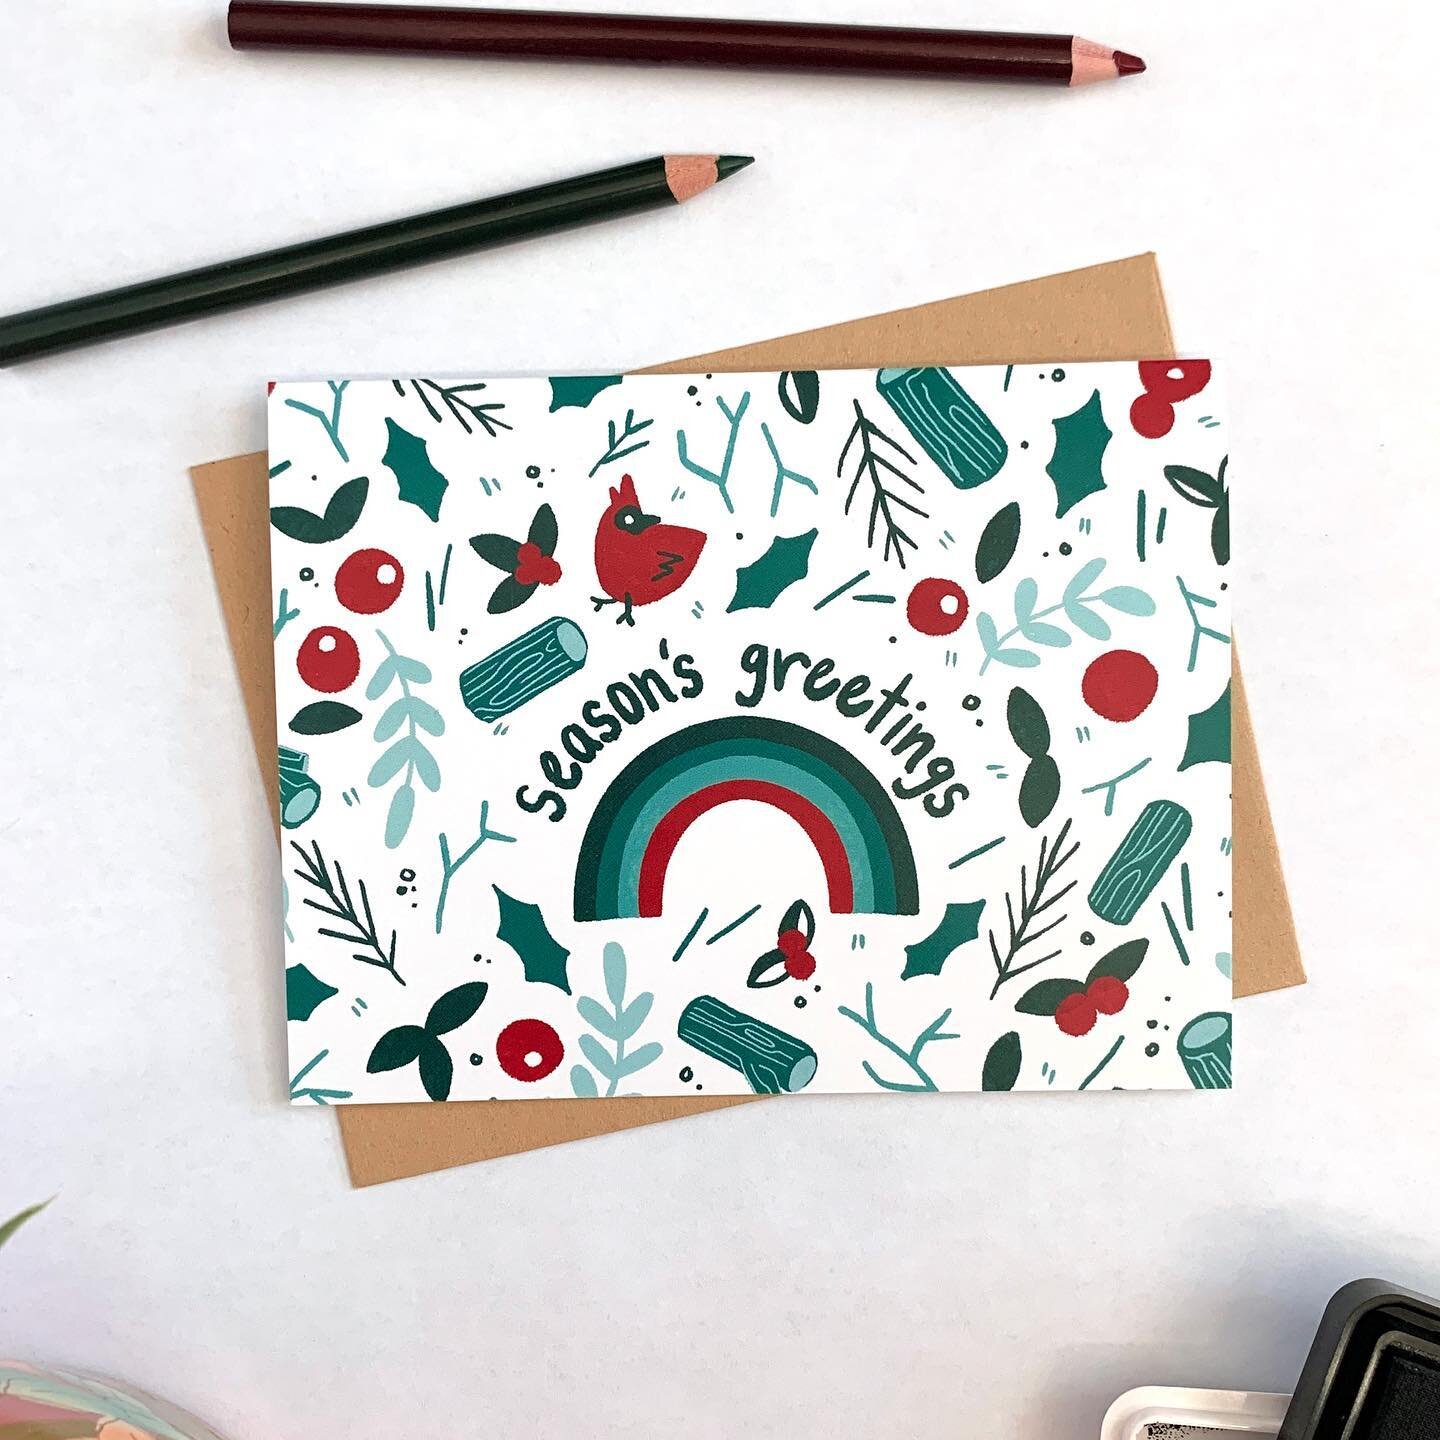 As we get closer and closer to the end of the year, don&rsquo;t forget that I have holiday cards still stocked! Plenty of my &lsquo;Winter Cheer&rsquo; design left and only a couple of the &lsquo;Dutch houses&rsquo; left!!
.
.
#greetingcarddesign #gr